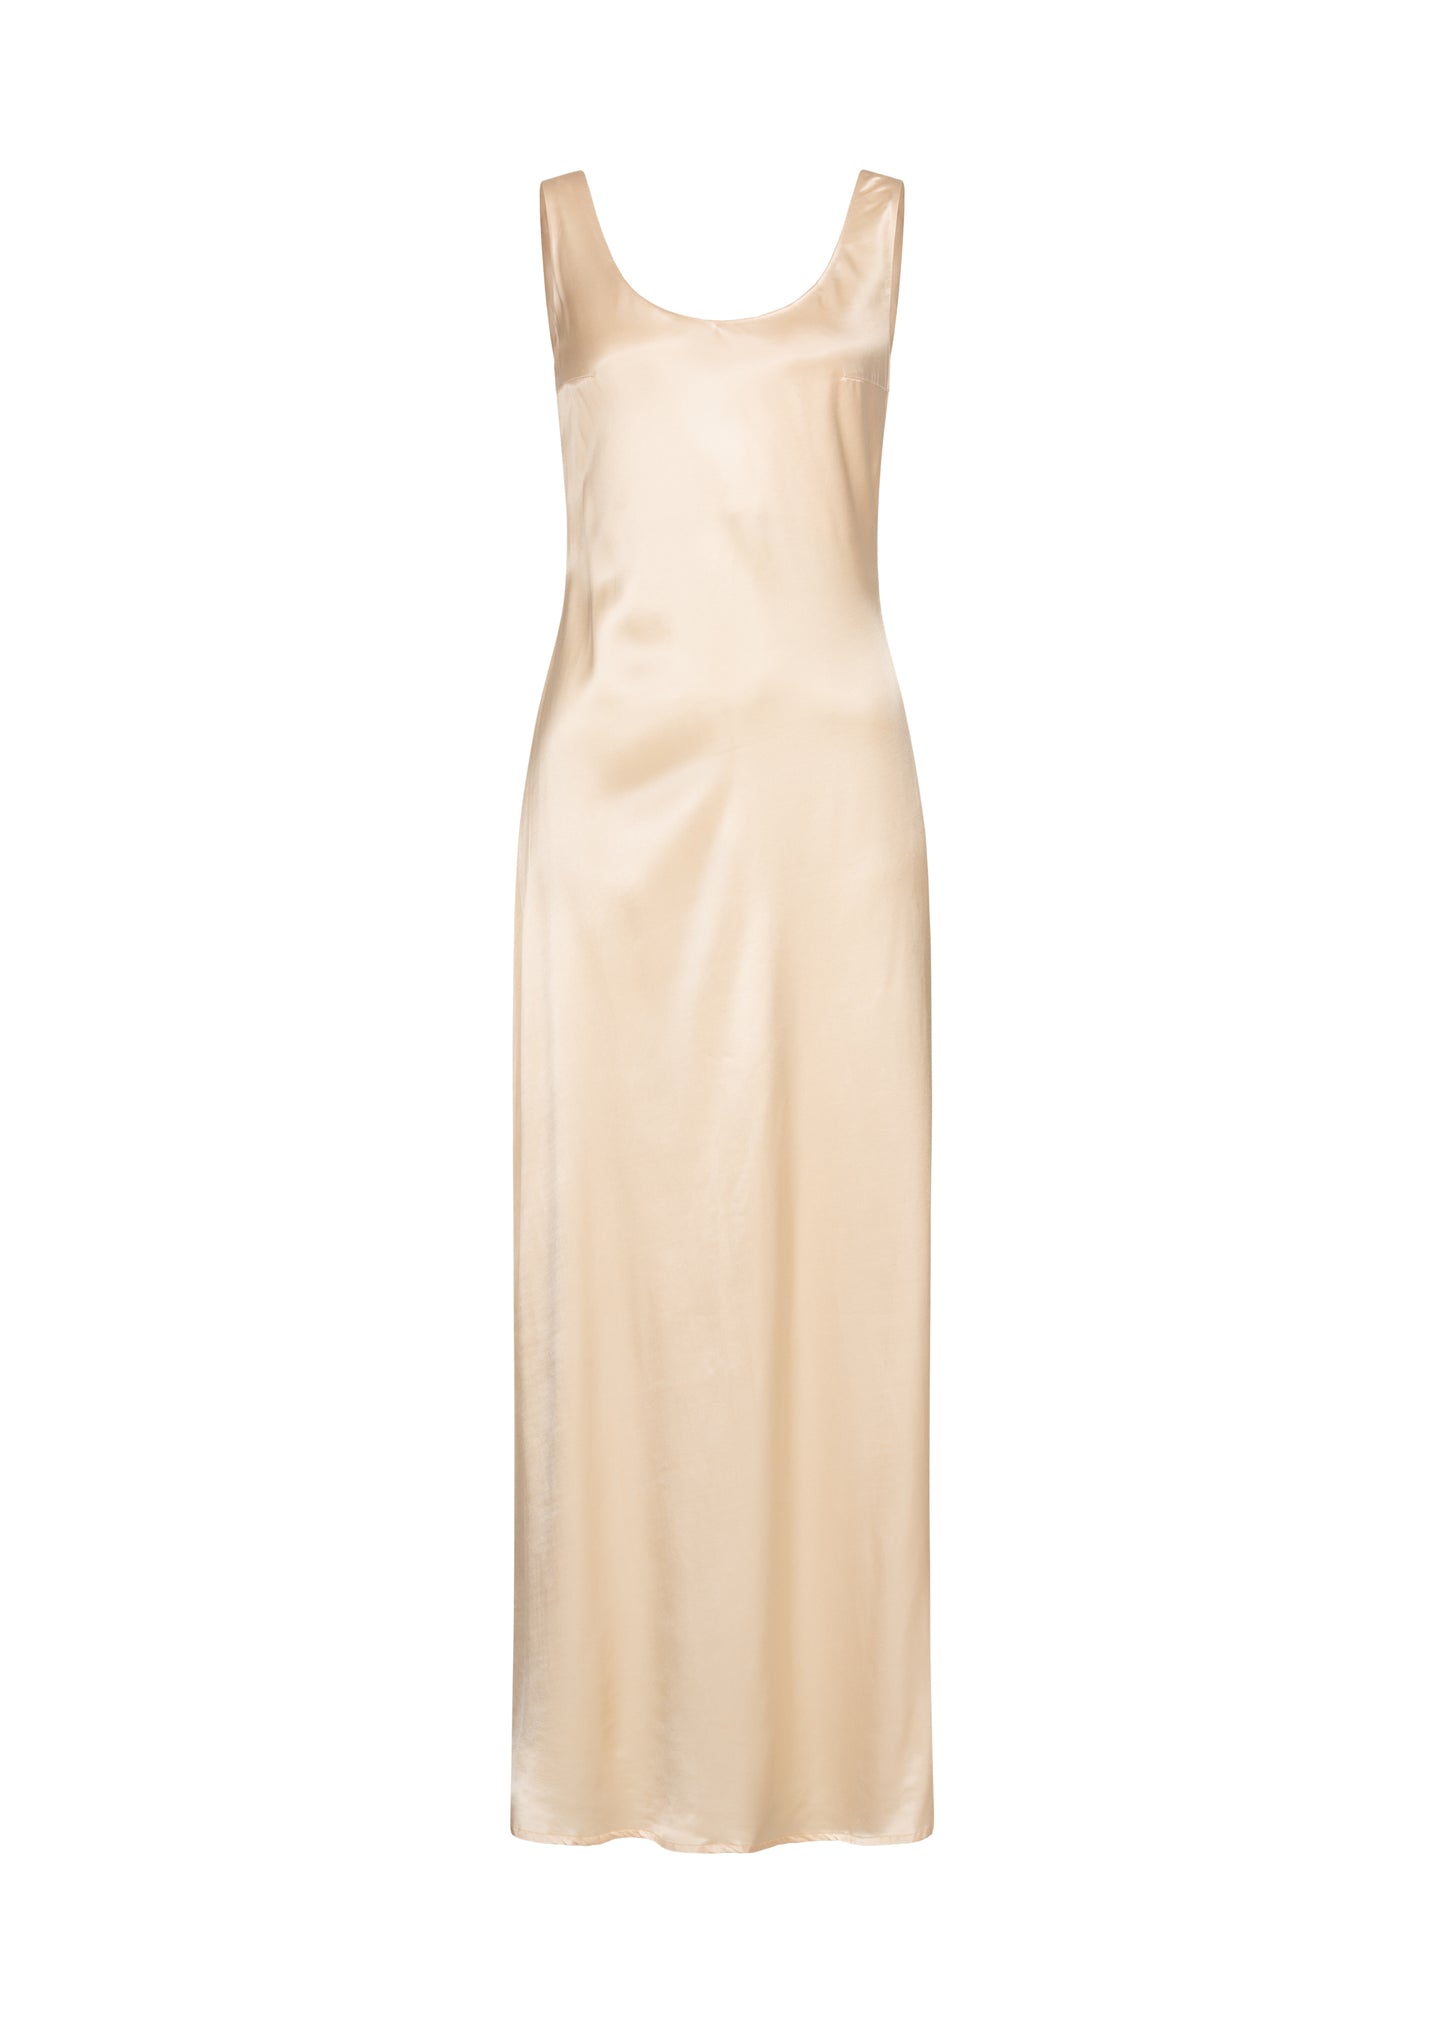 Silky viscose long dress with round neck from FORMA brand